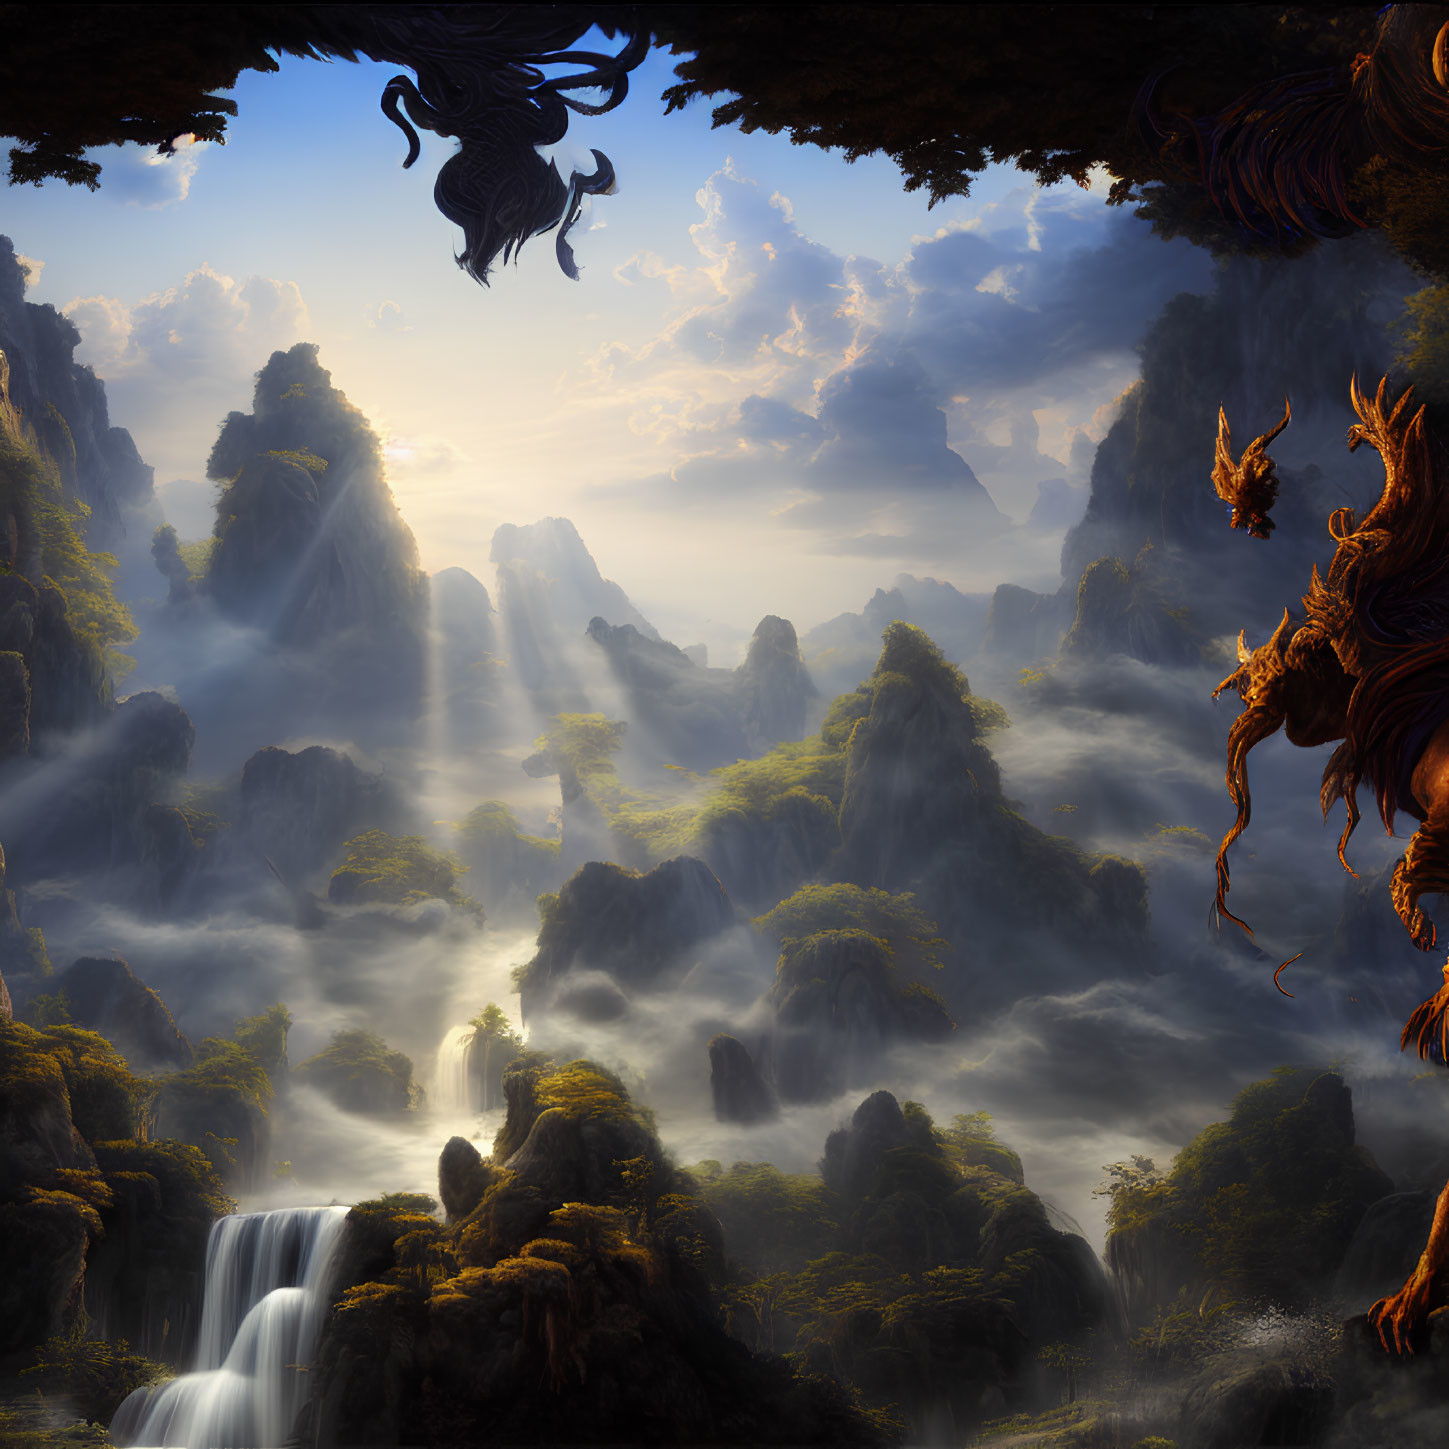 Misty mountains, waterfalls, and mystical creatures in dramatic landscape